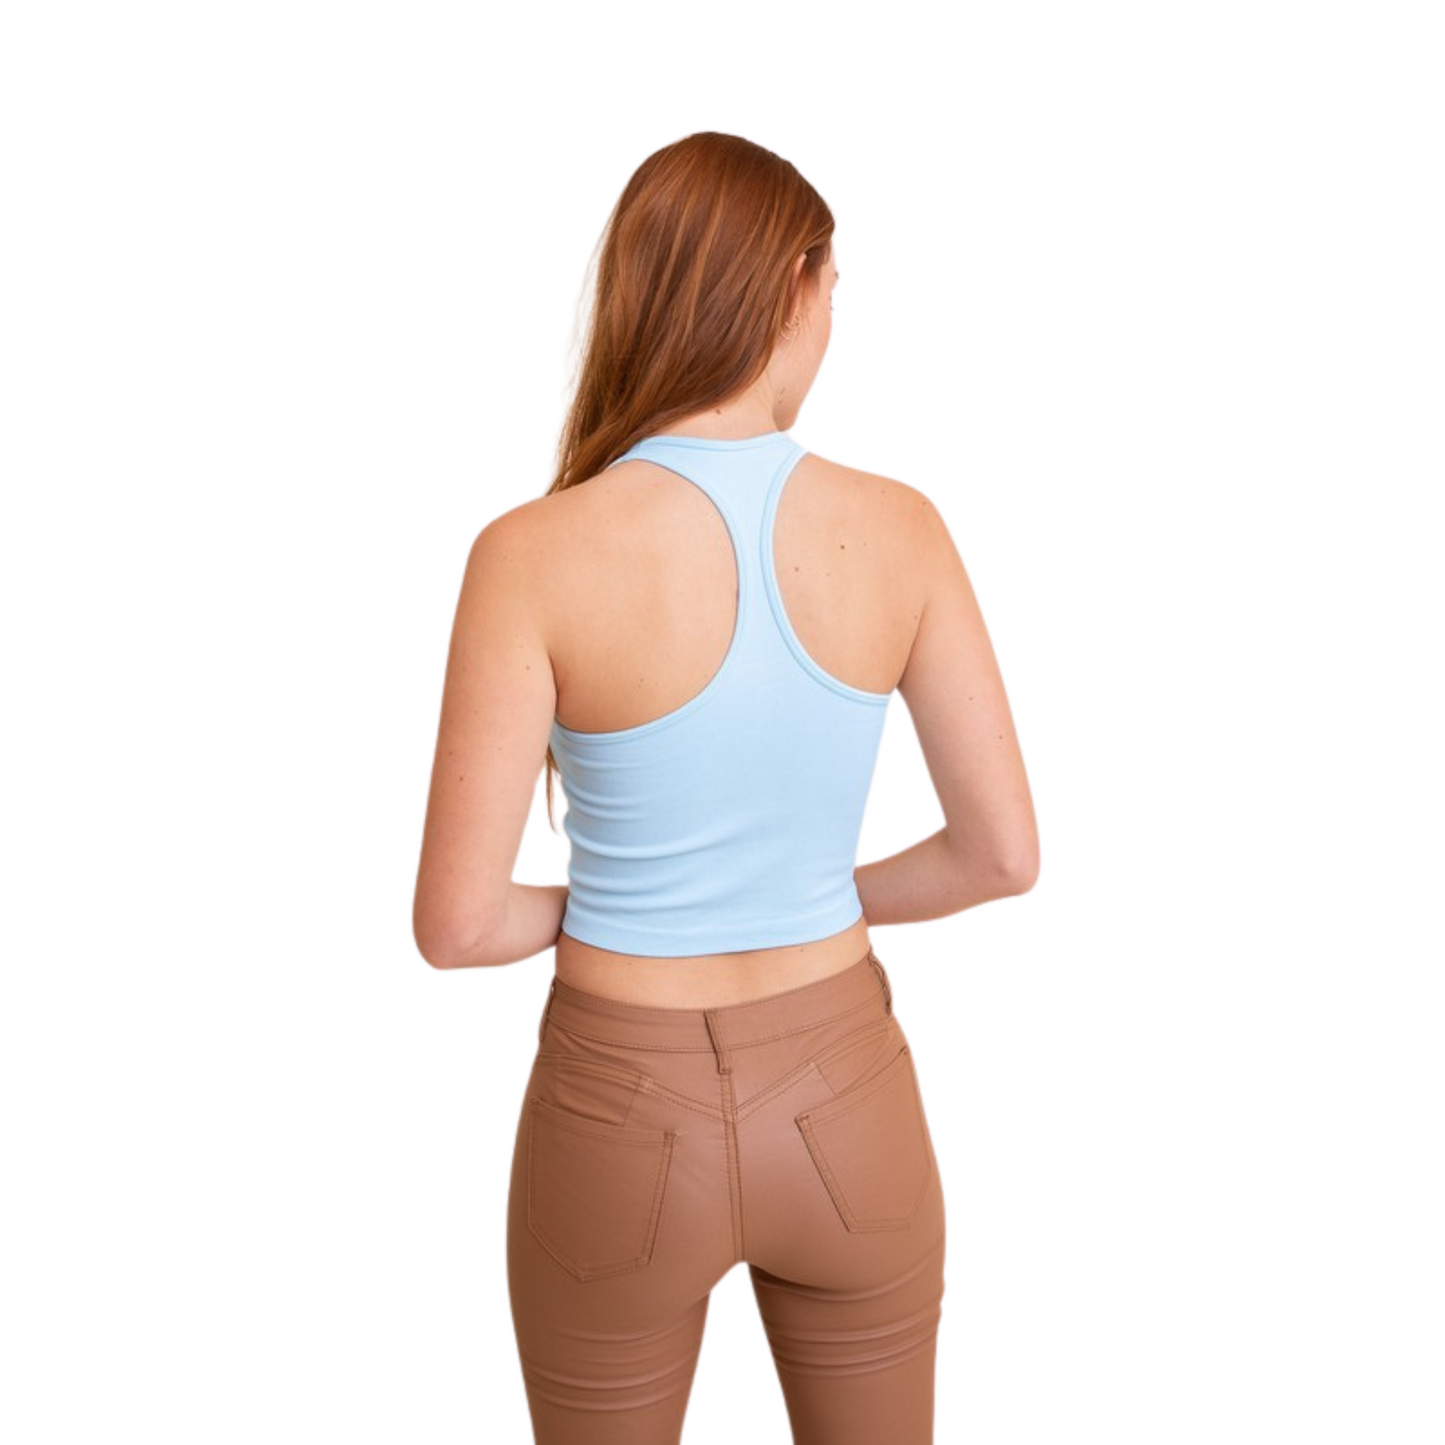 This High Neck Racerback Brami Top is the ideal wardrobe staple. Available in baby blue, grey blue, and black, it is the perfect top for any occasion. With its timeless style, you can be sure that you'll look and feel great when you wear it.